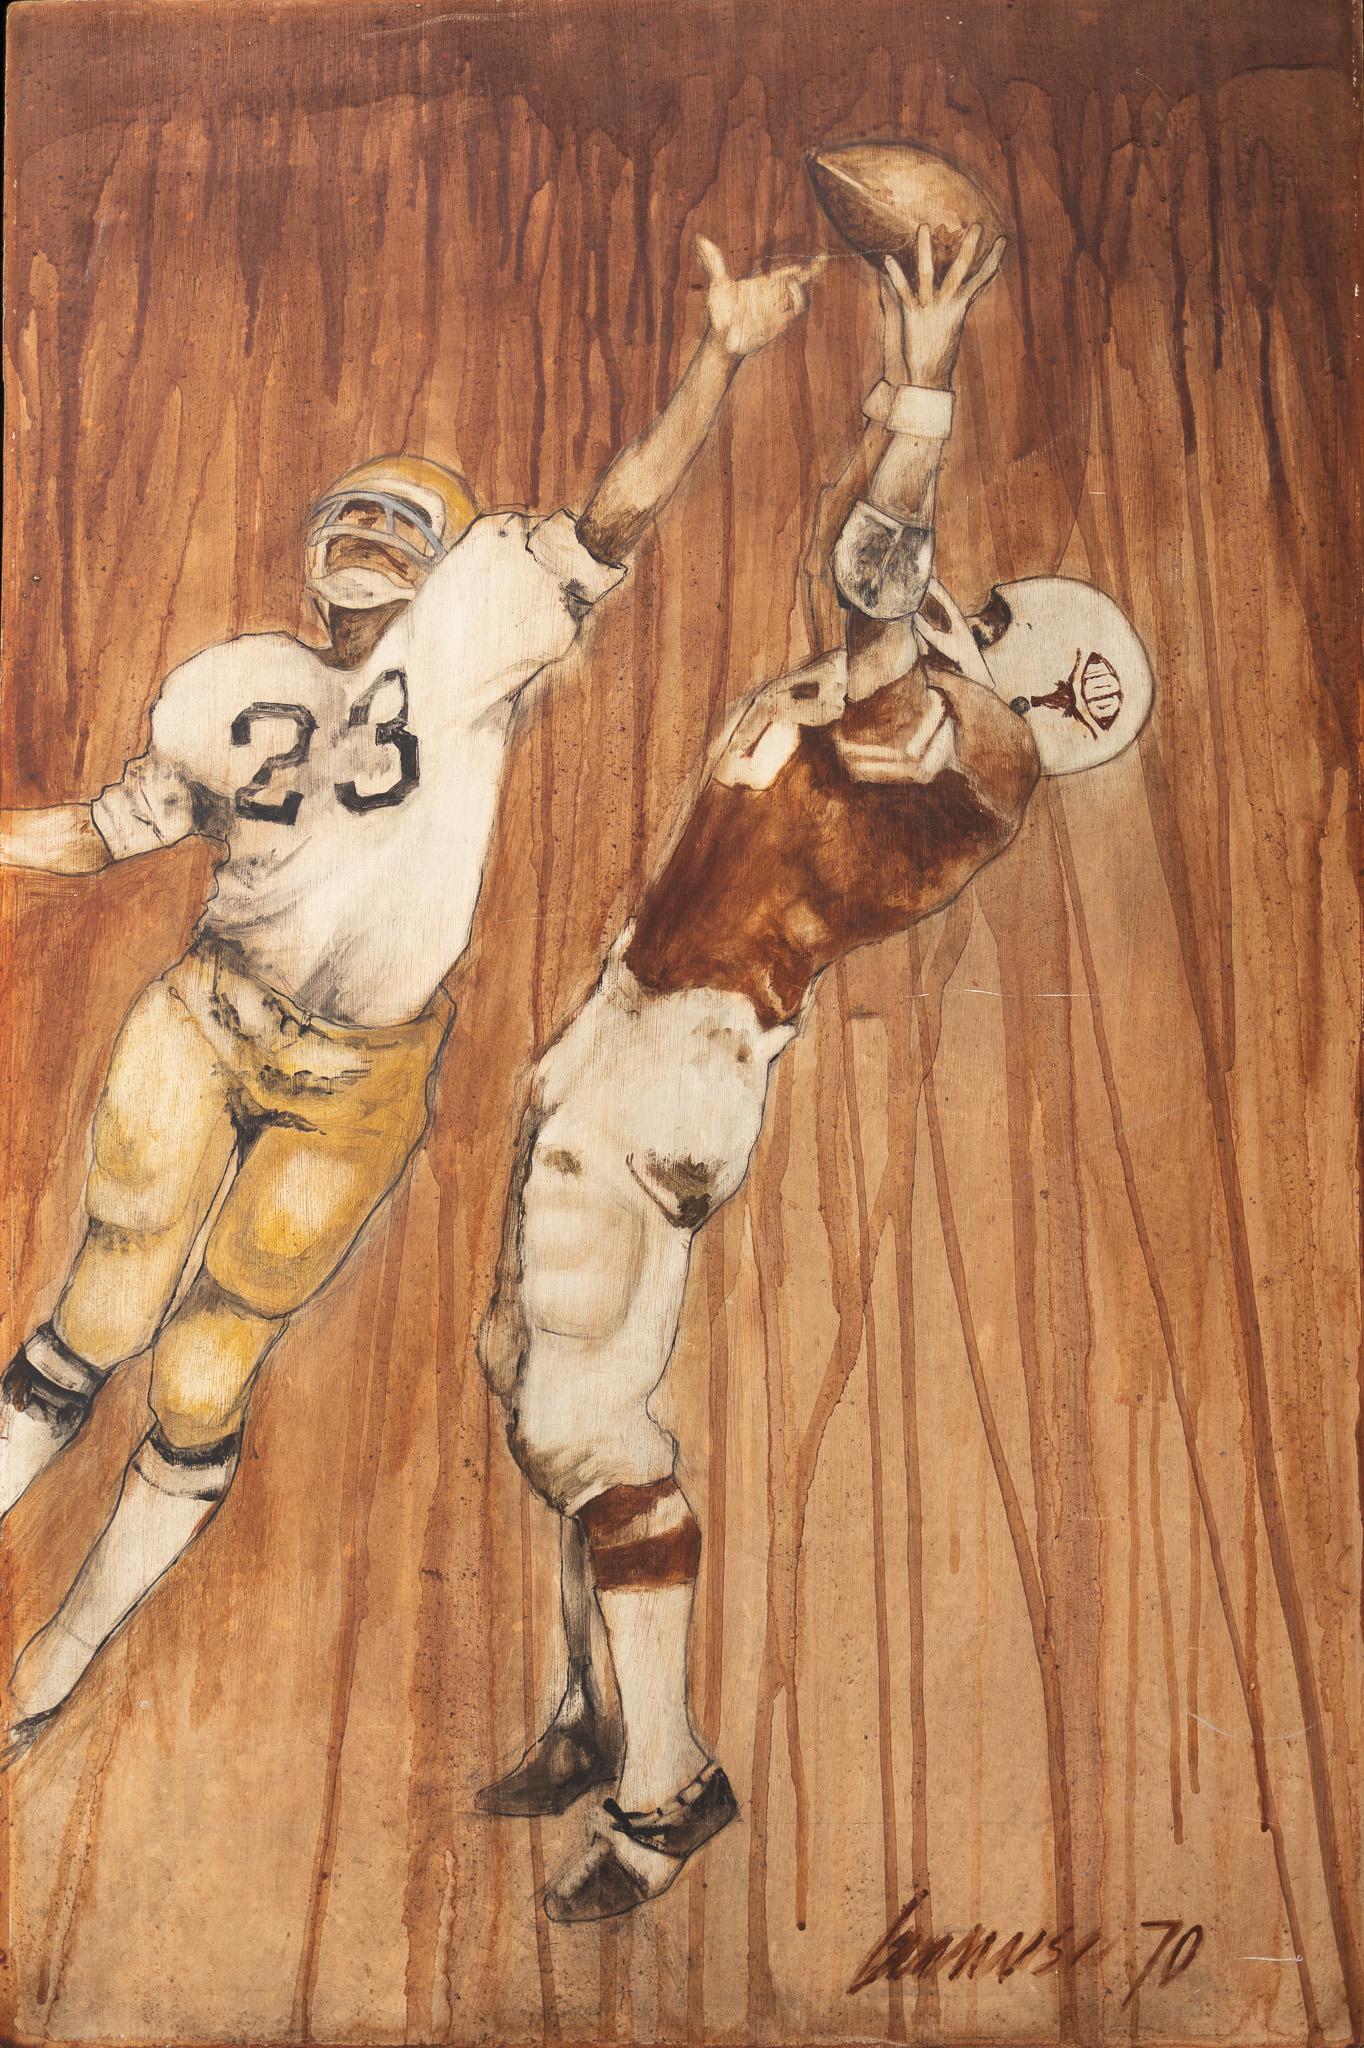 Ragan Gennusa Figurative Painting - "The Catch" Painting of a Texas Longhorn Football Game